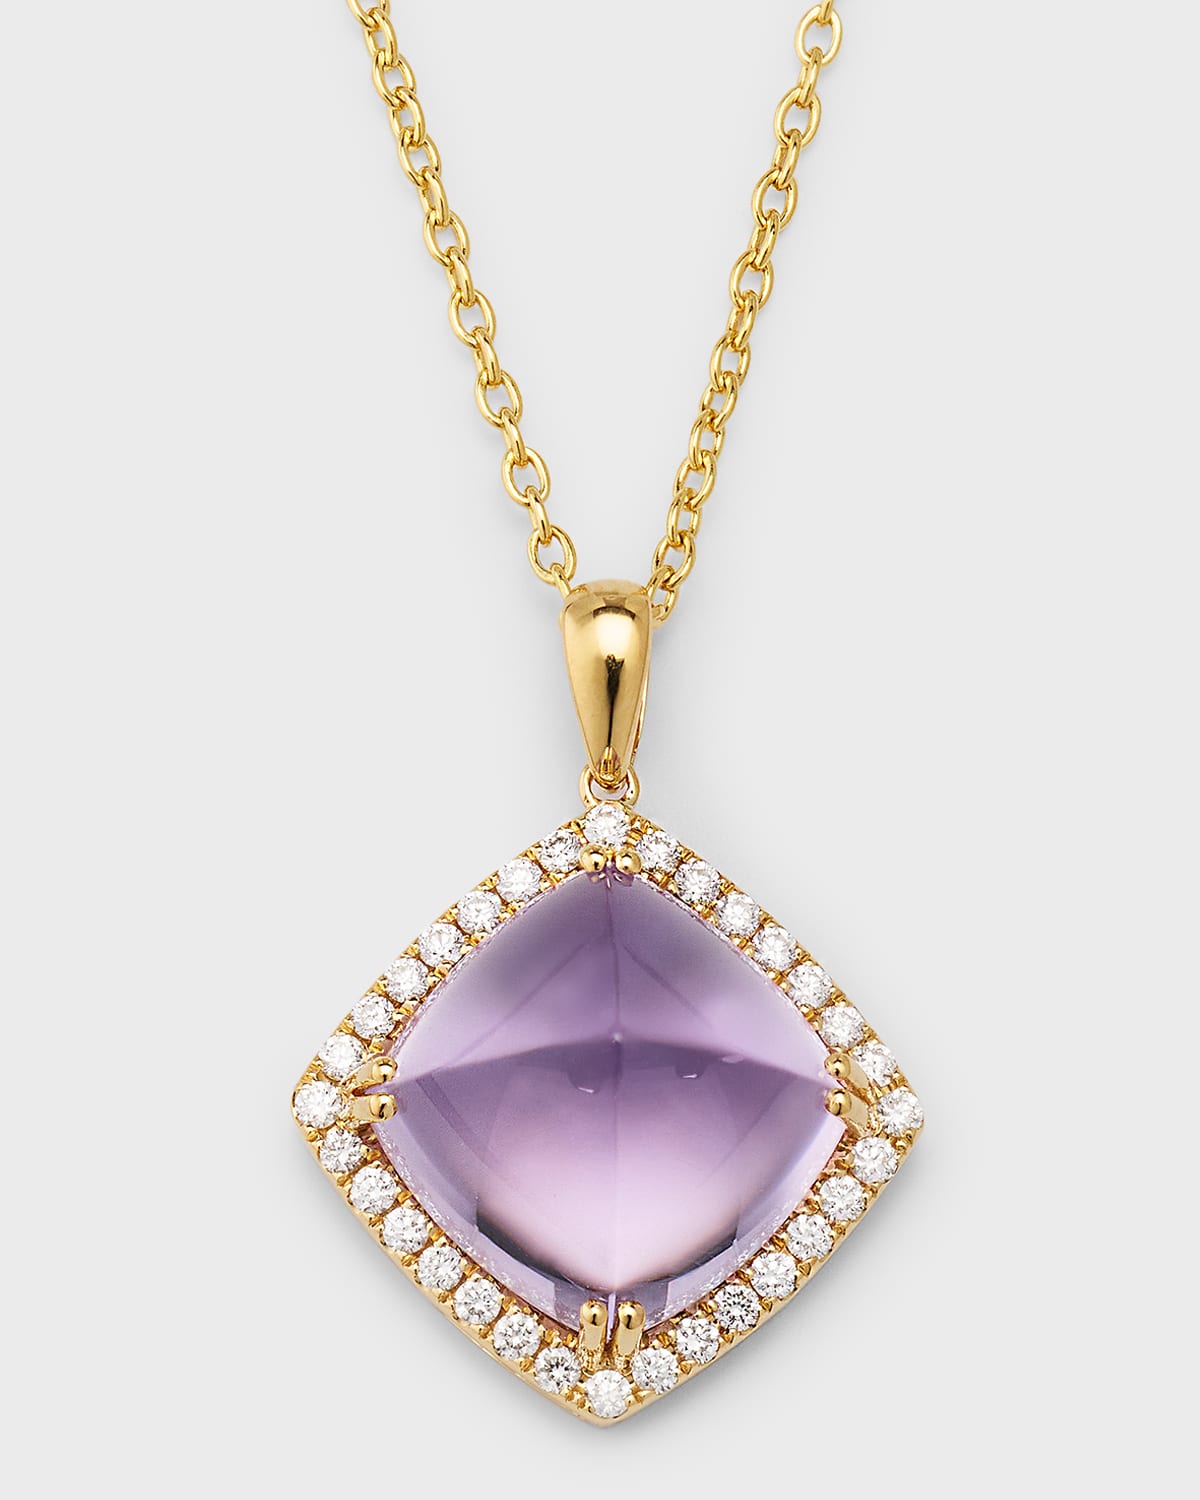 18K Yellow Gold Pendant with Amethyst and Diamonds, 8.38tcw